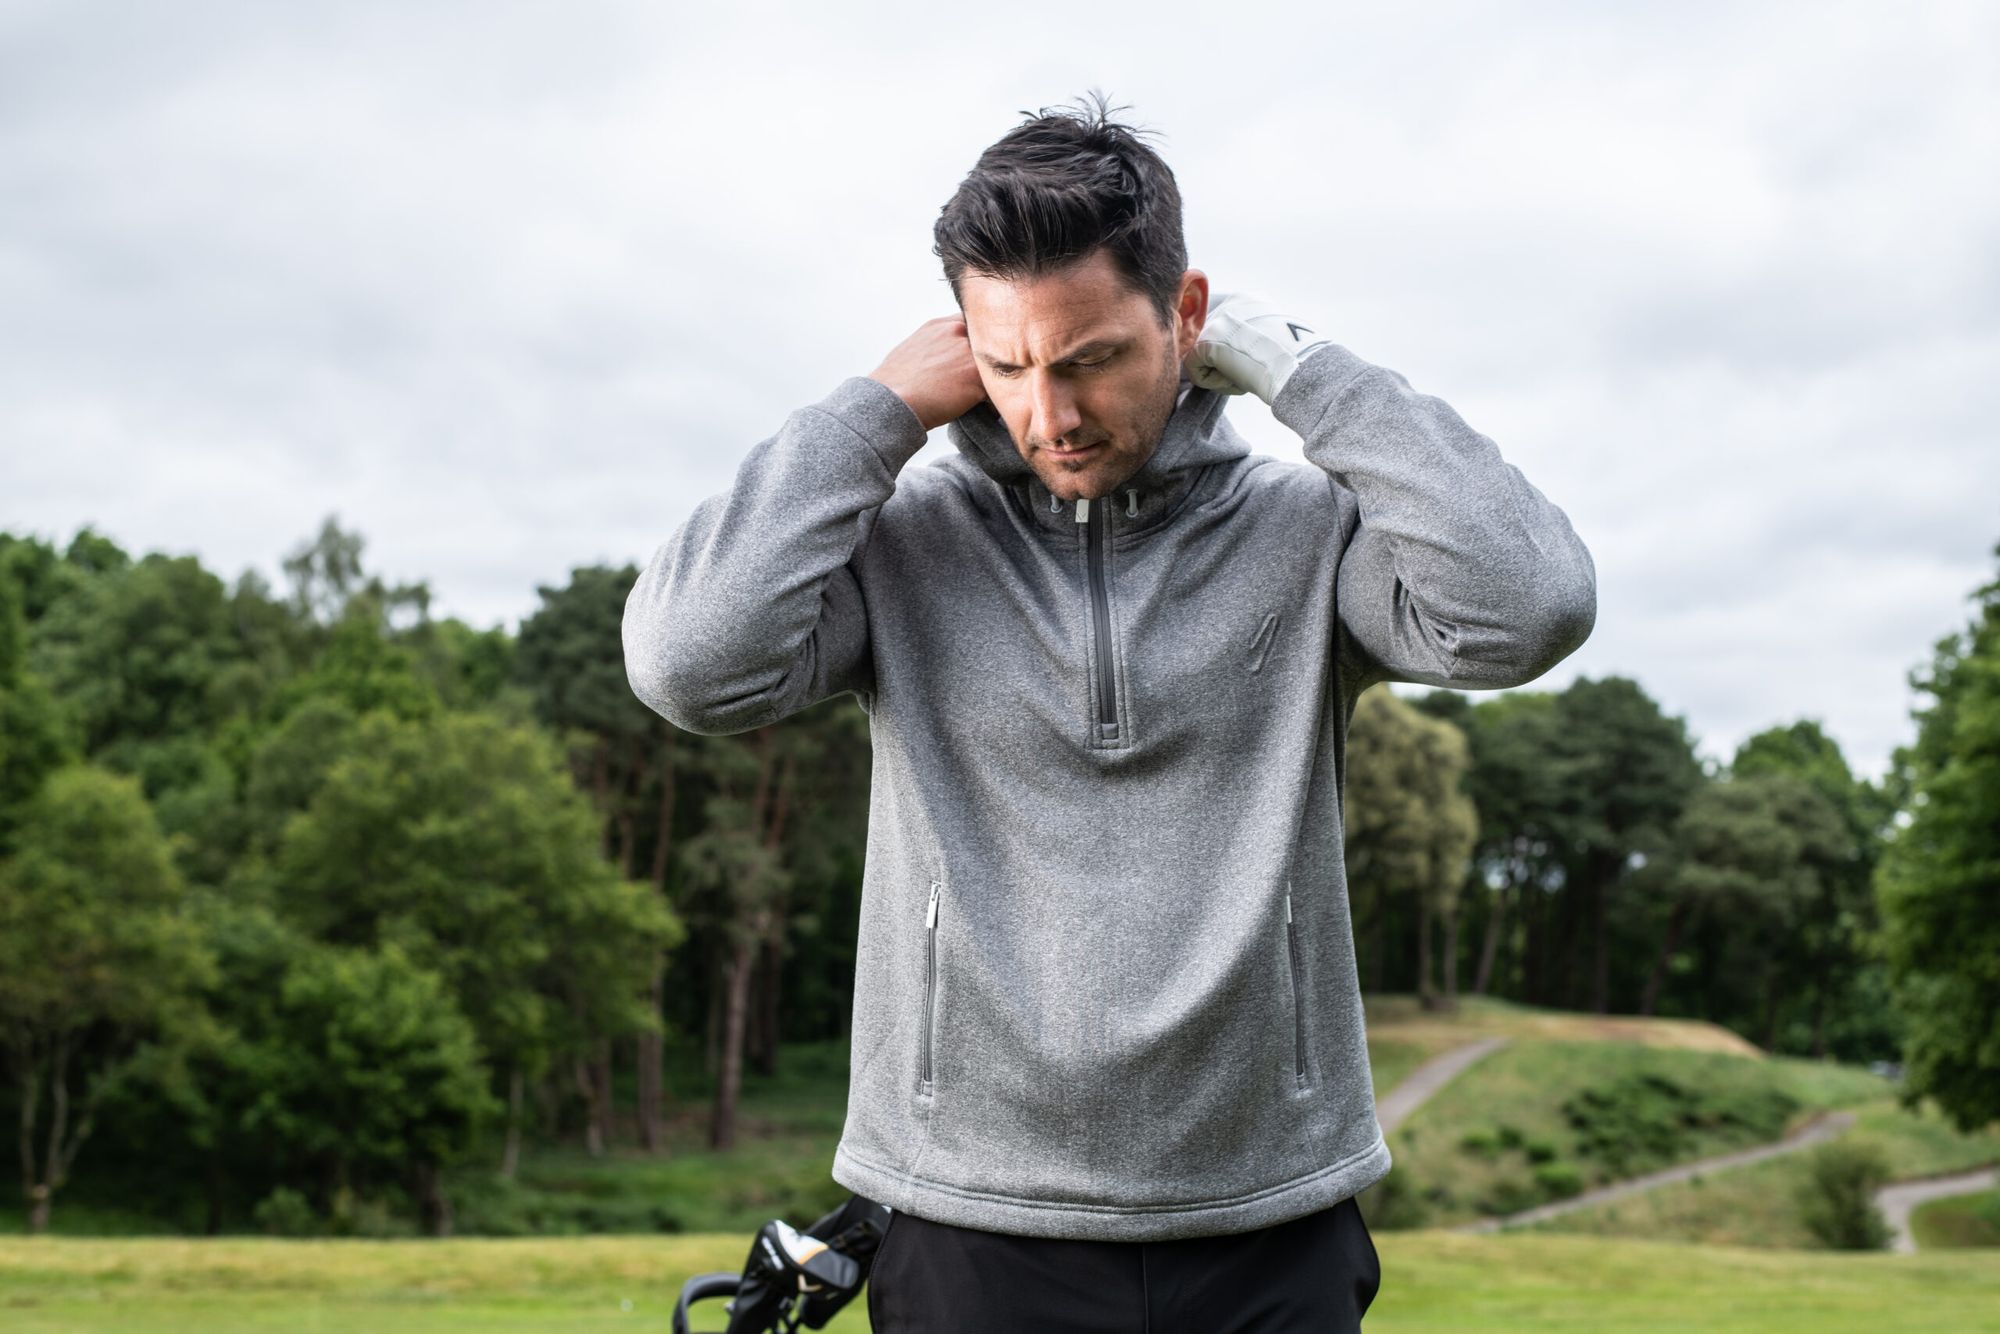 Male golfer on a golf course adjusting the collar on his sweater.